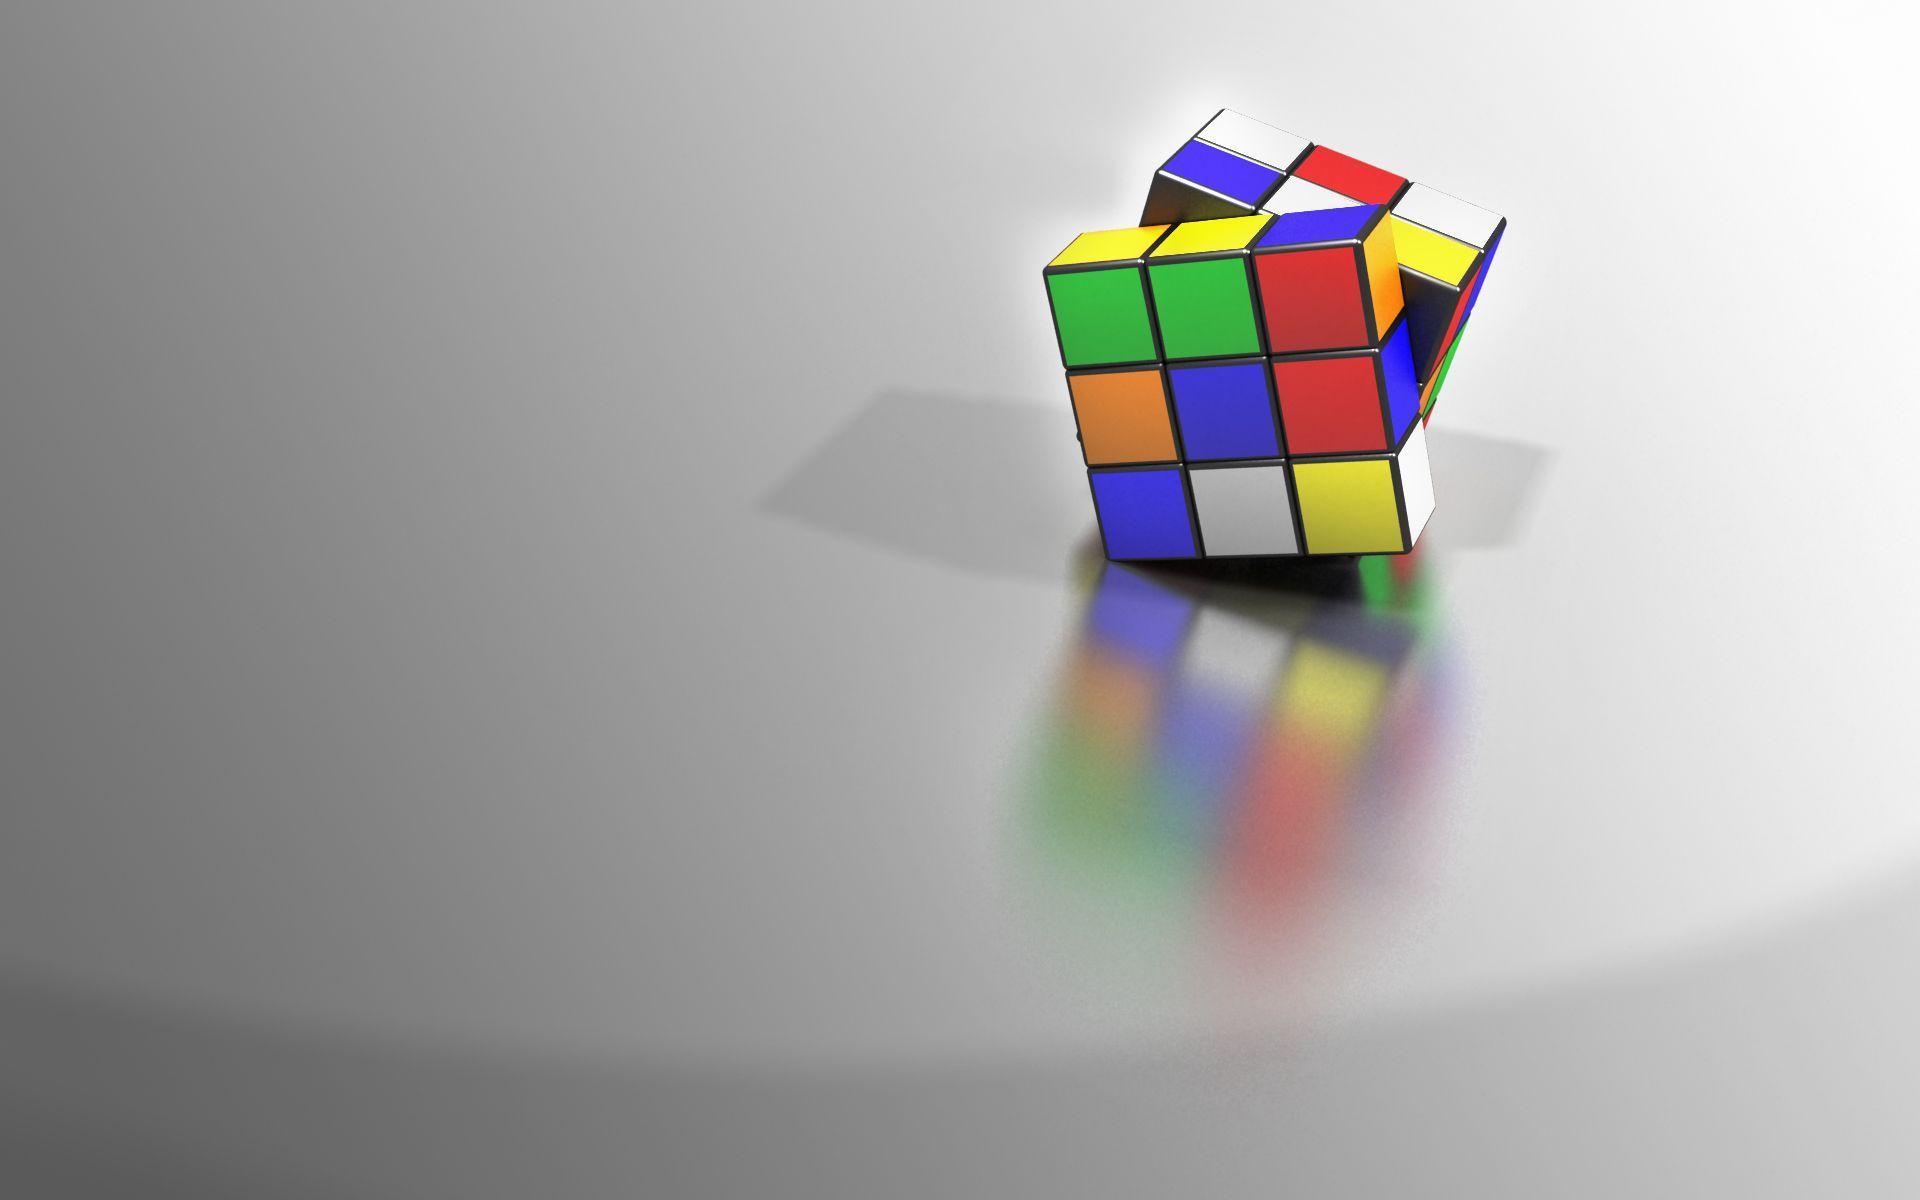 Rubiks Cube Wallpapers 5852 1920x1200.